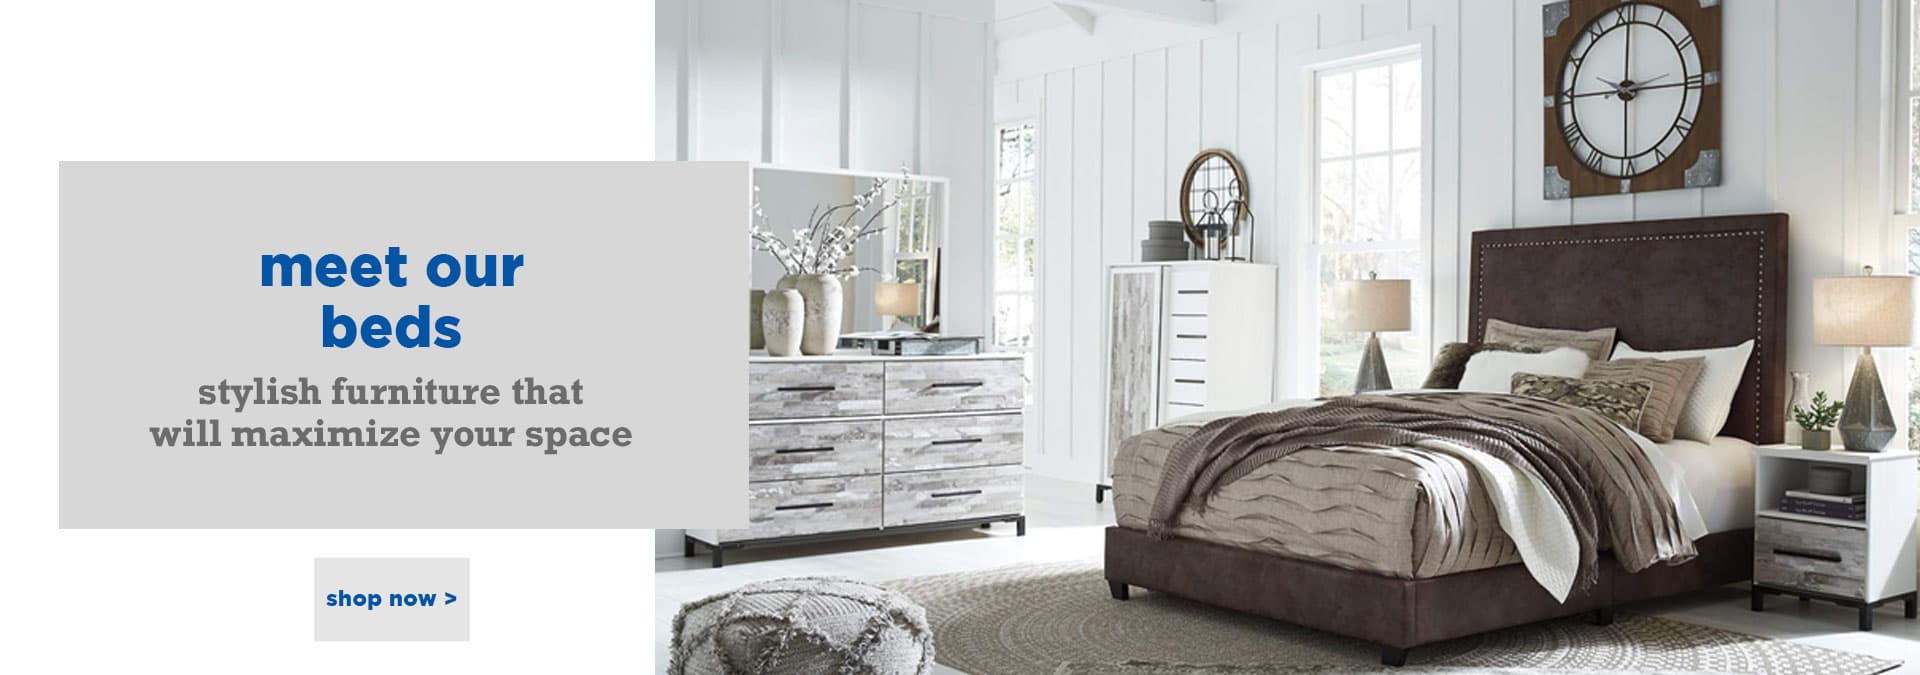 meet our beds. stylish furniture that will maximize your space – shop now